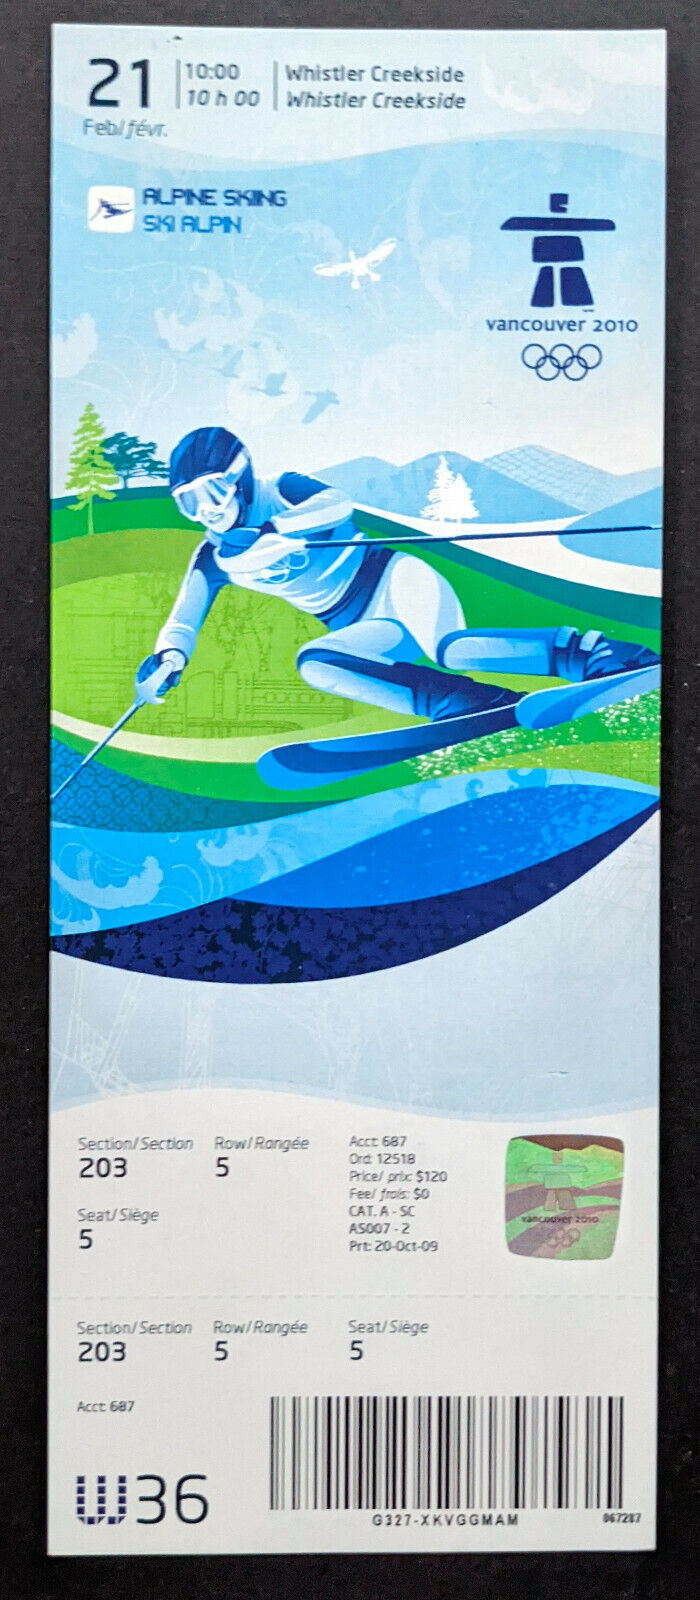 2010 Vancouver Olympics Full Ticket Men's Super Combined Downhill Alpine Skiing